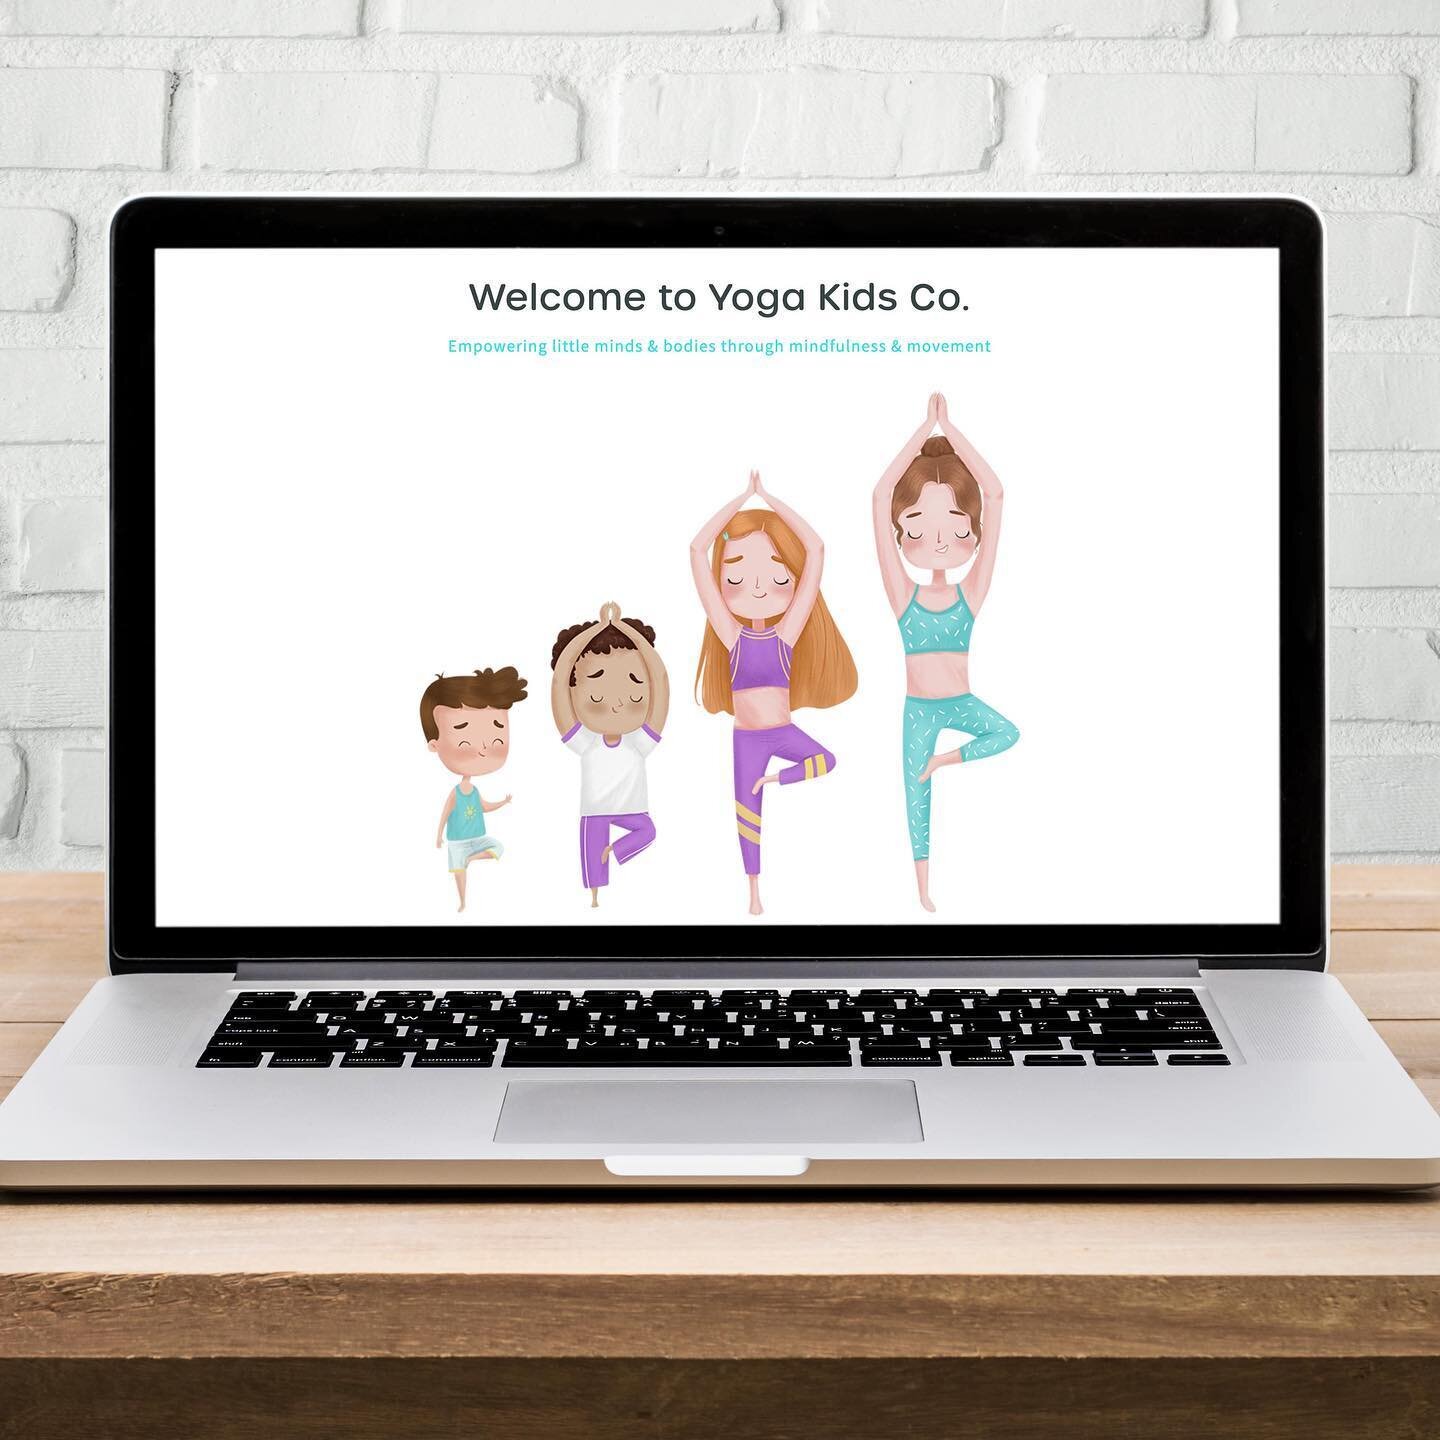 I just love these illustrations that we had created for the @yogakidsco website. They were the perfect addition to the visual identity for this local business.

I bet so many Sunny Coast kids are hanging out for this beautiful little business to re-o